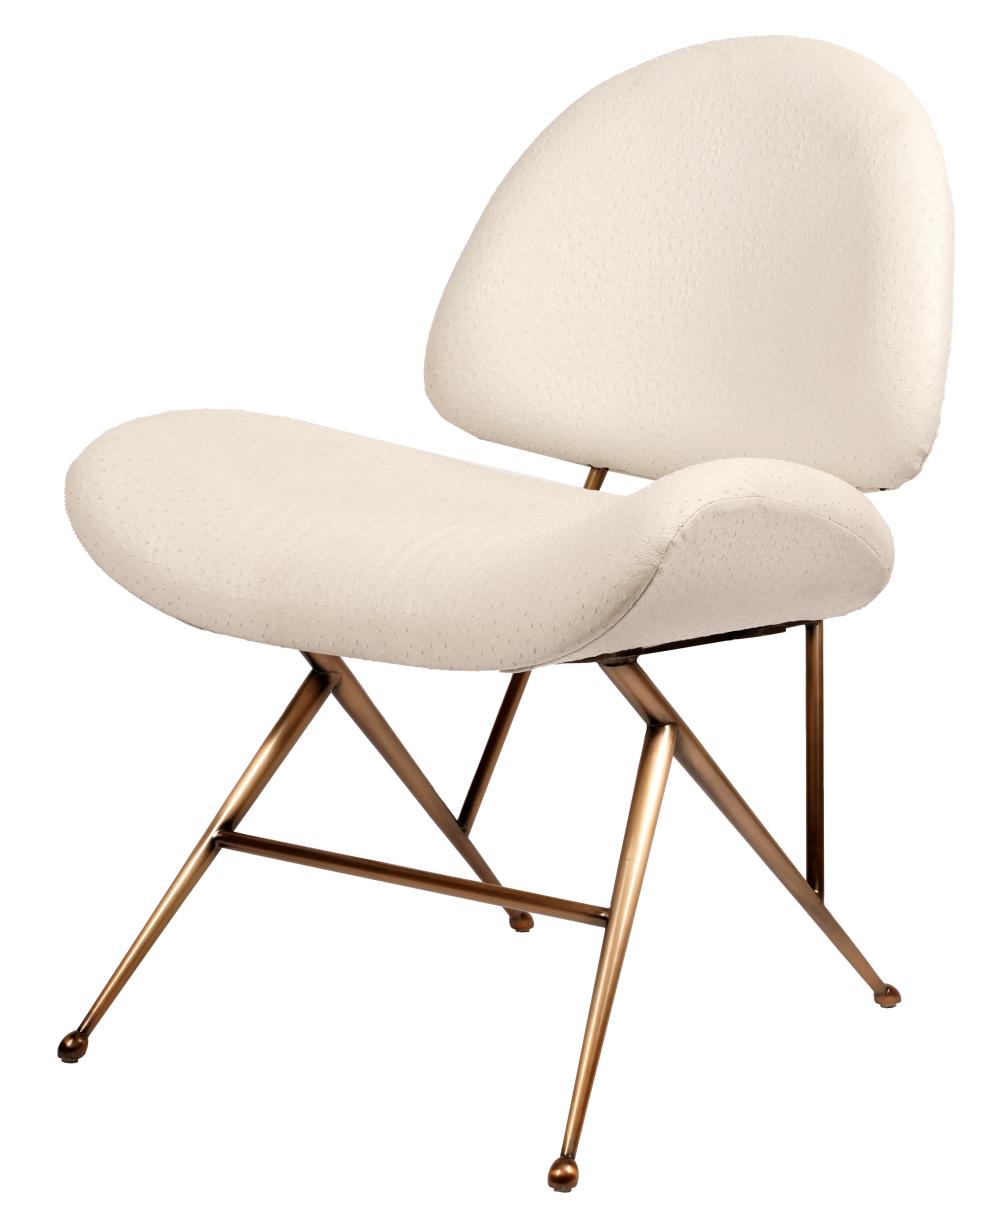 MODERNIST WHITE LEATHER CHAIRunsigned;